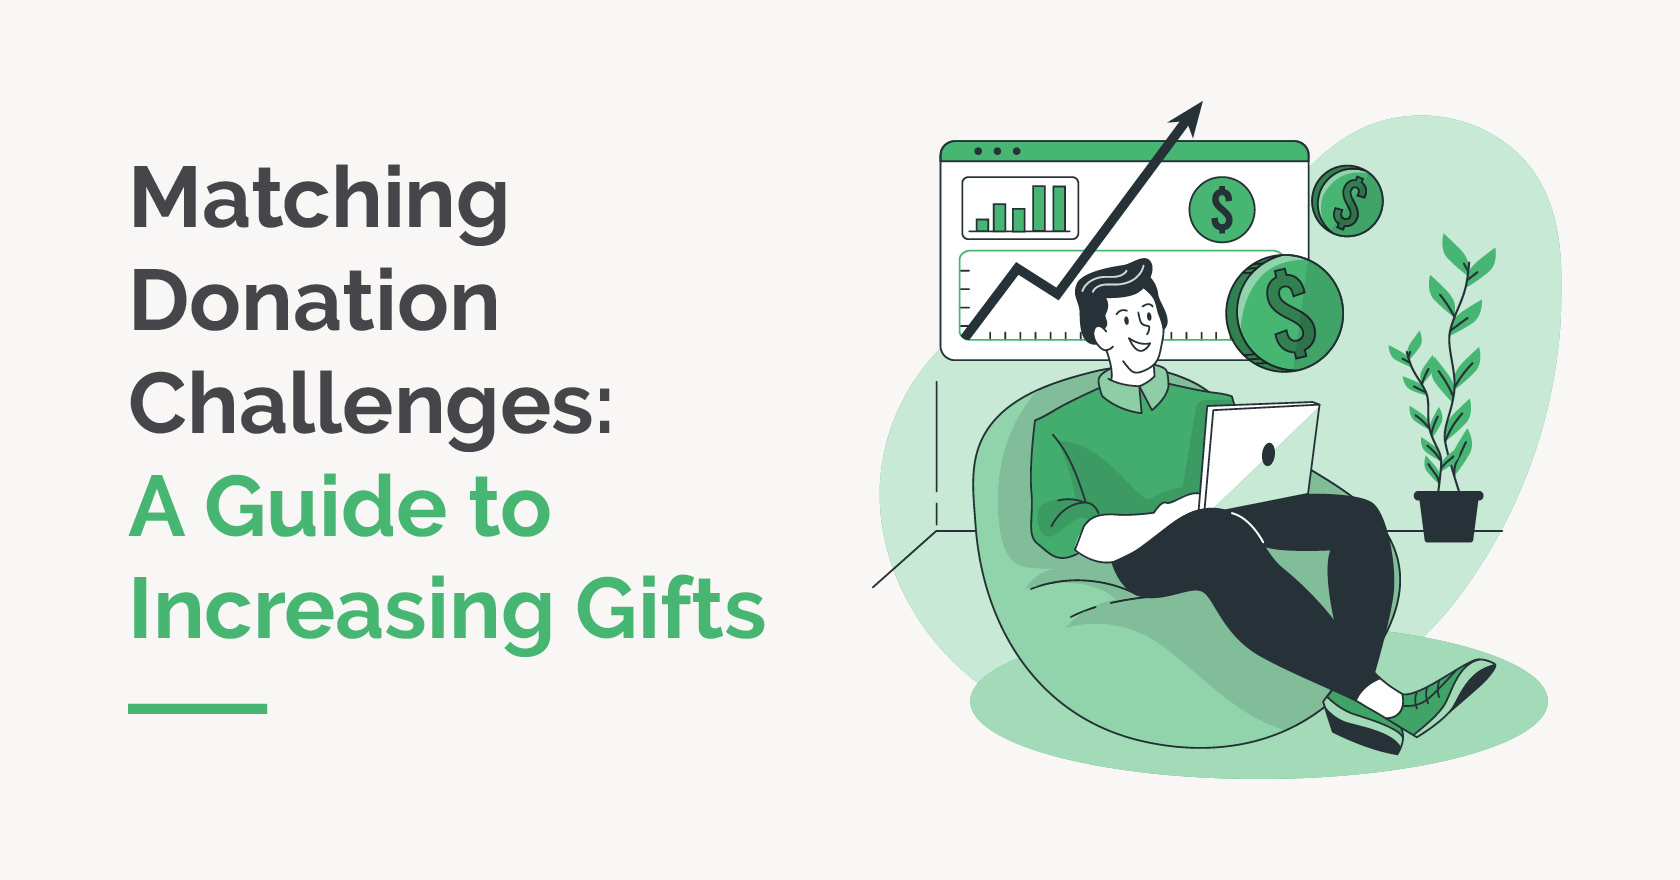 This guide will go over how you can increase gifts through a matching donation challenge.